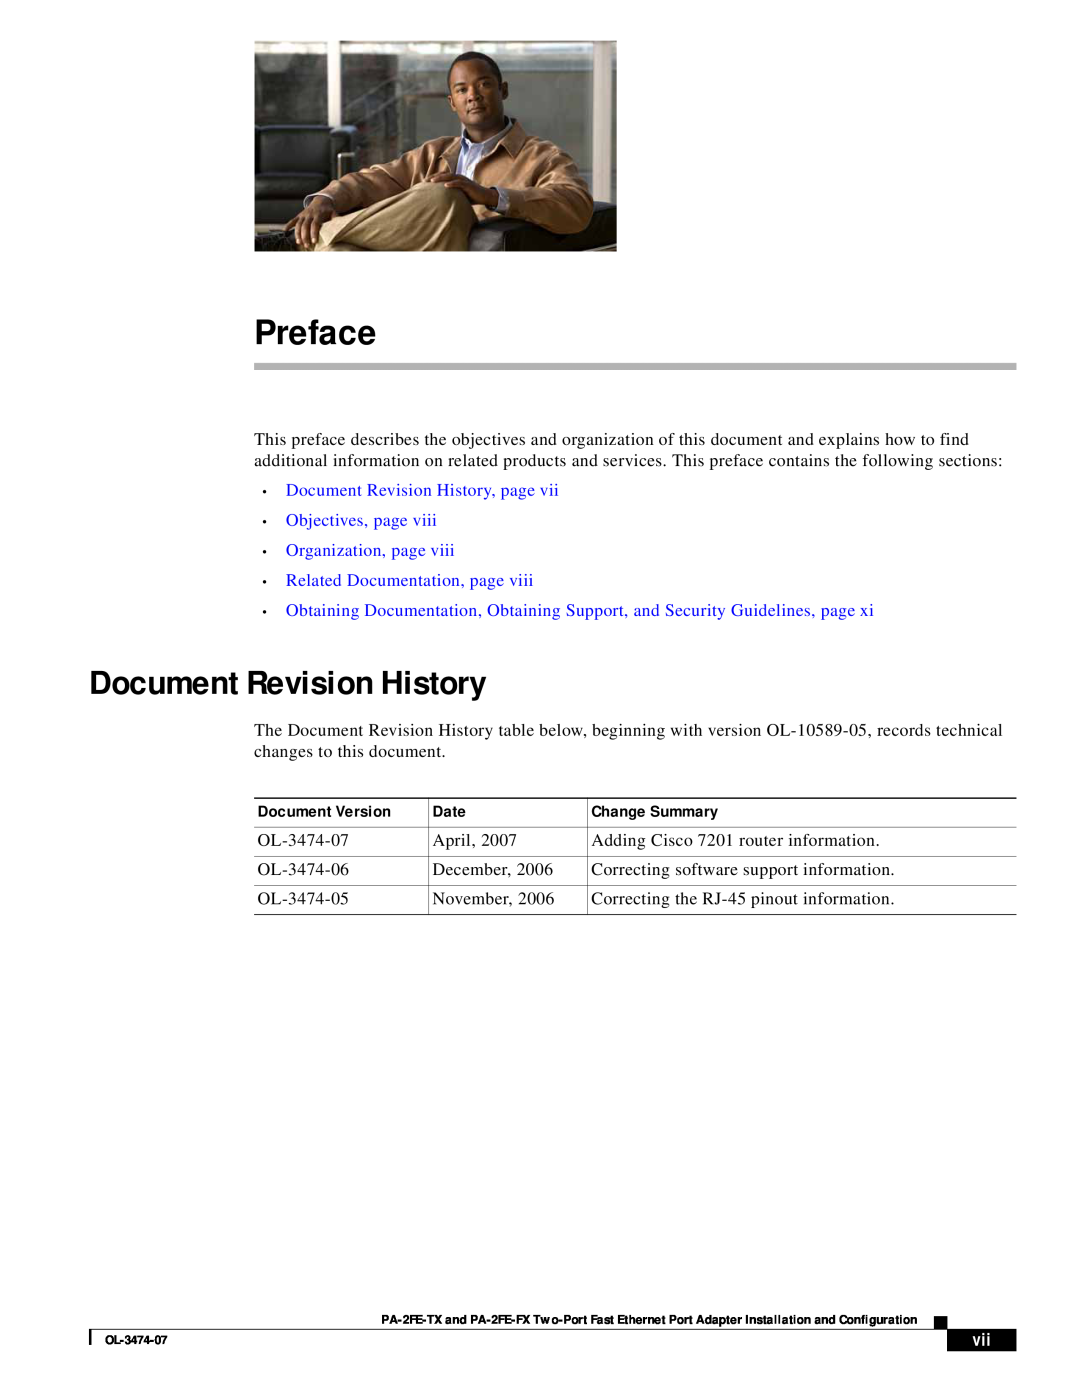 Cisco Systems PA-2FE-FX, PA-2FE-TX manual Preface, Document Revision History, Related Documentation, page 